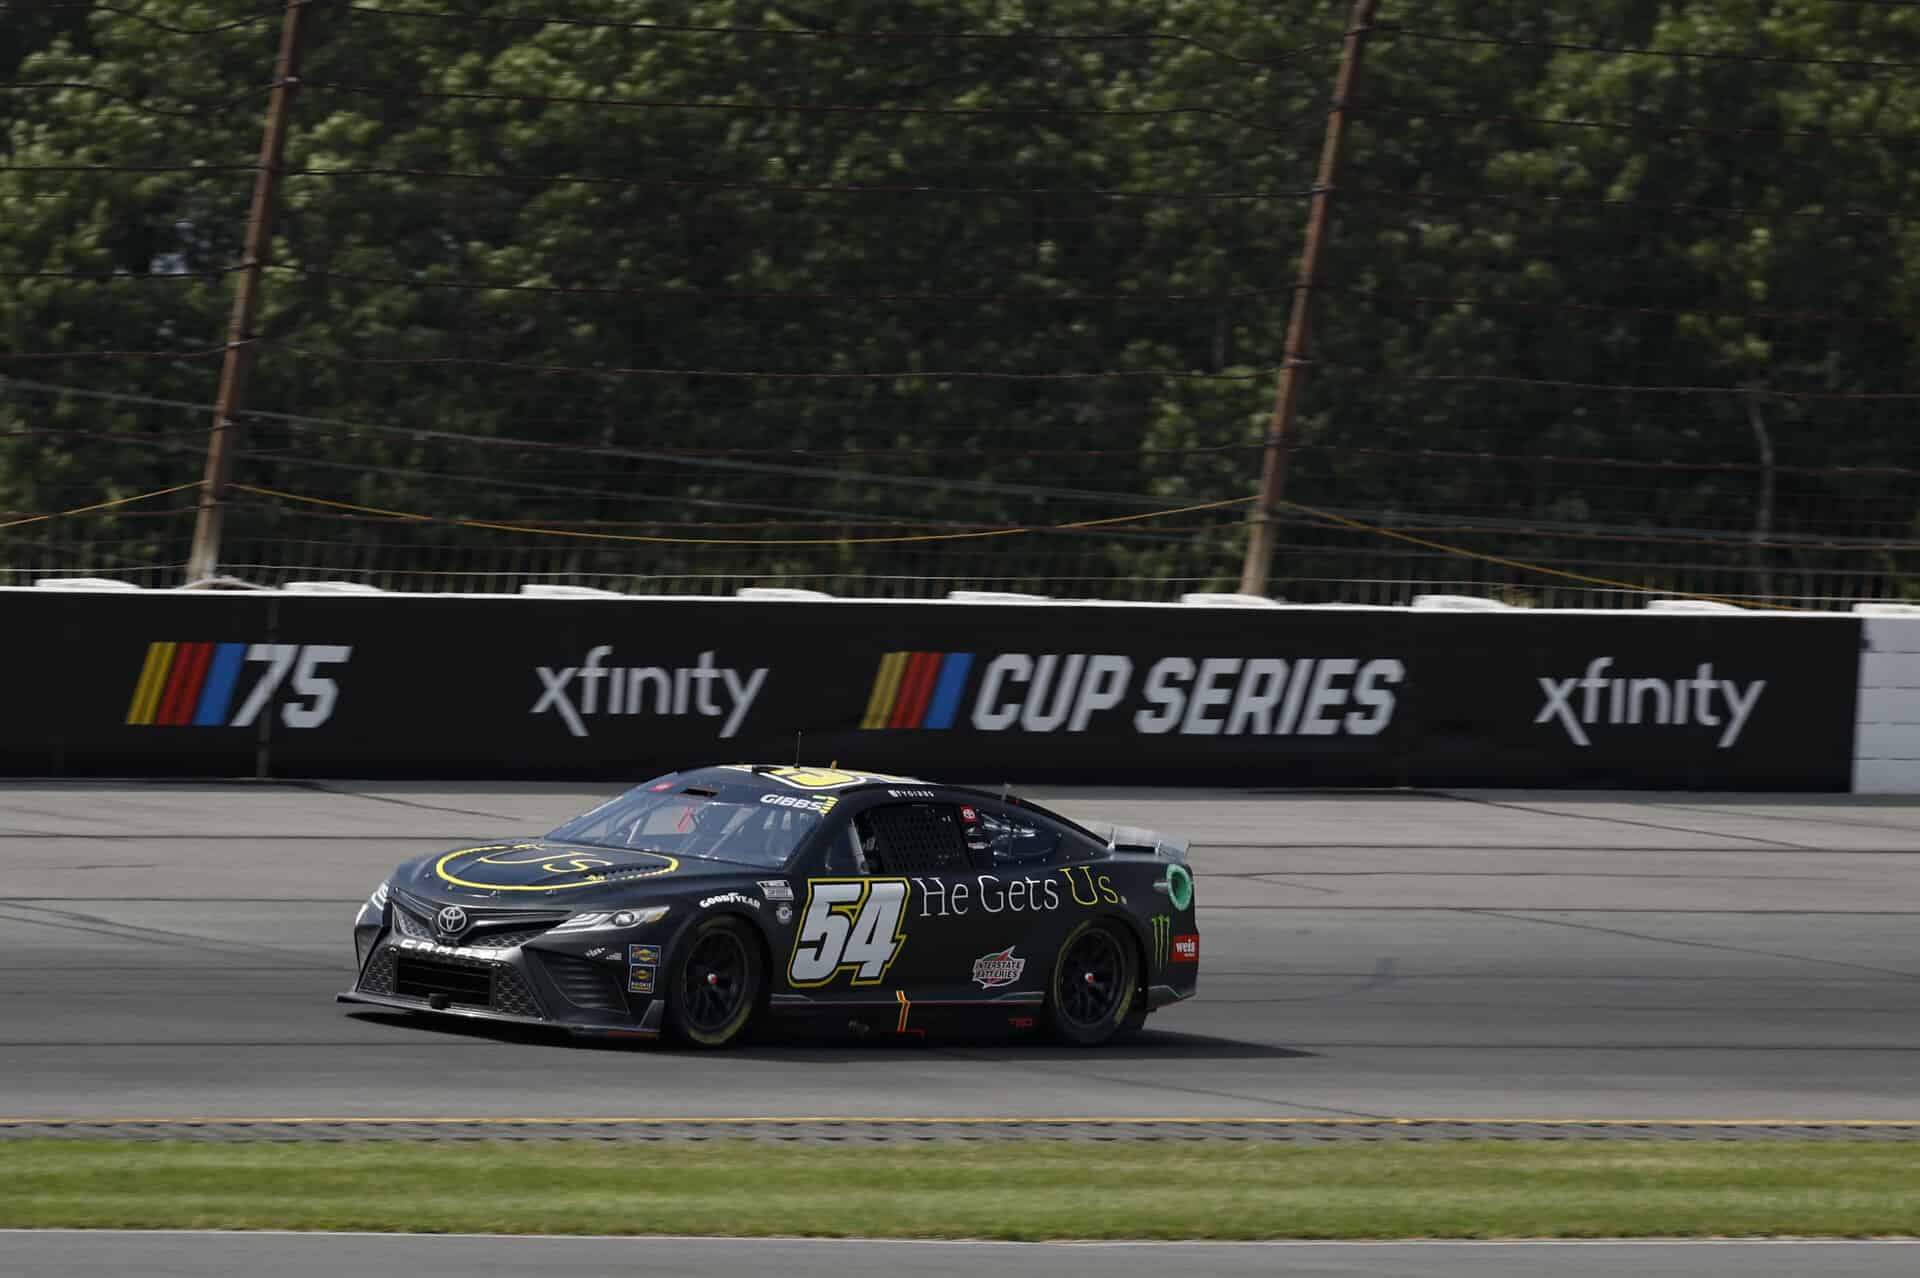 Ty gibbs earned his first career top-five finish in his return to pocono raceway for the nascar cup series highpoint. Com 400.